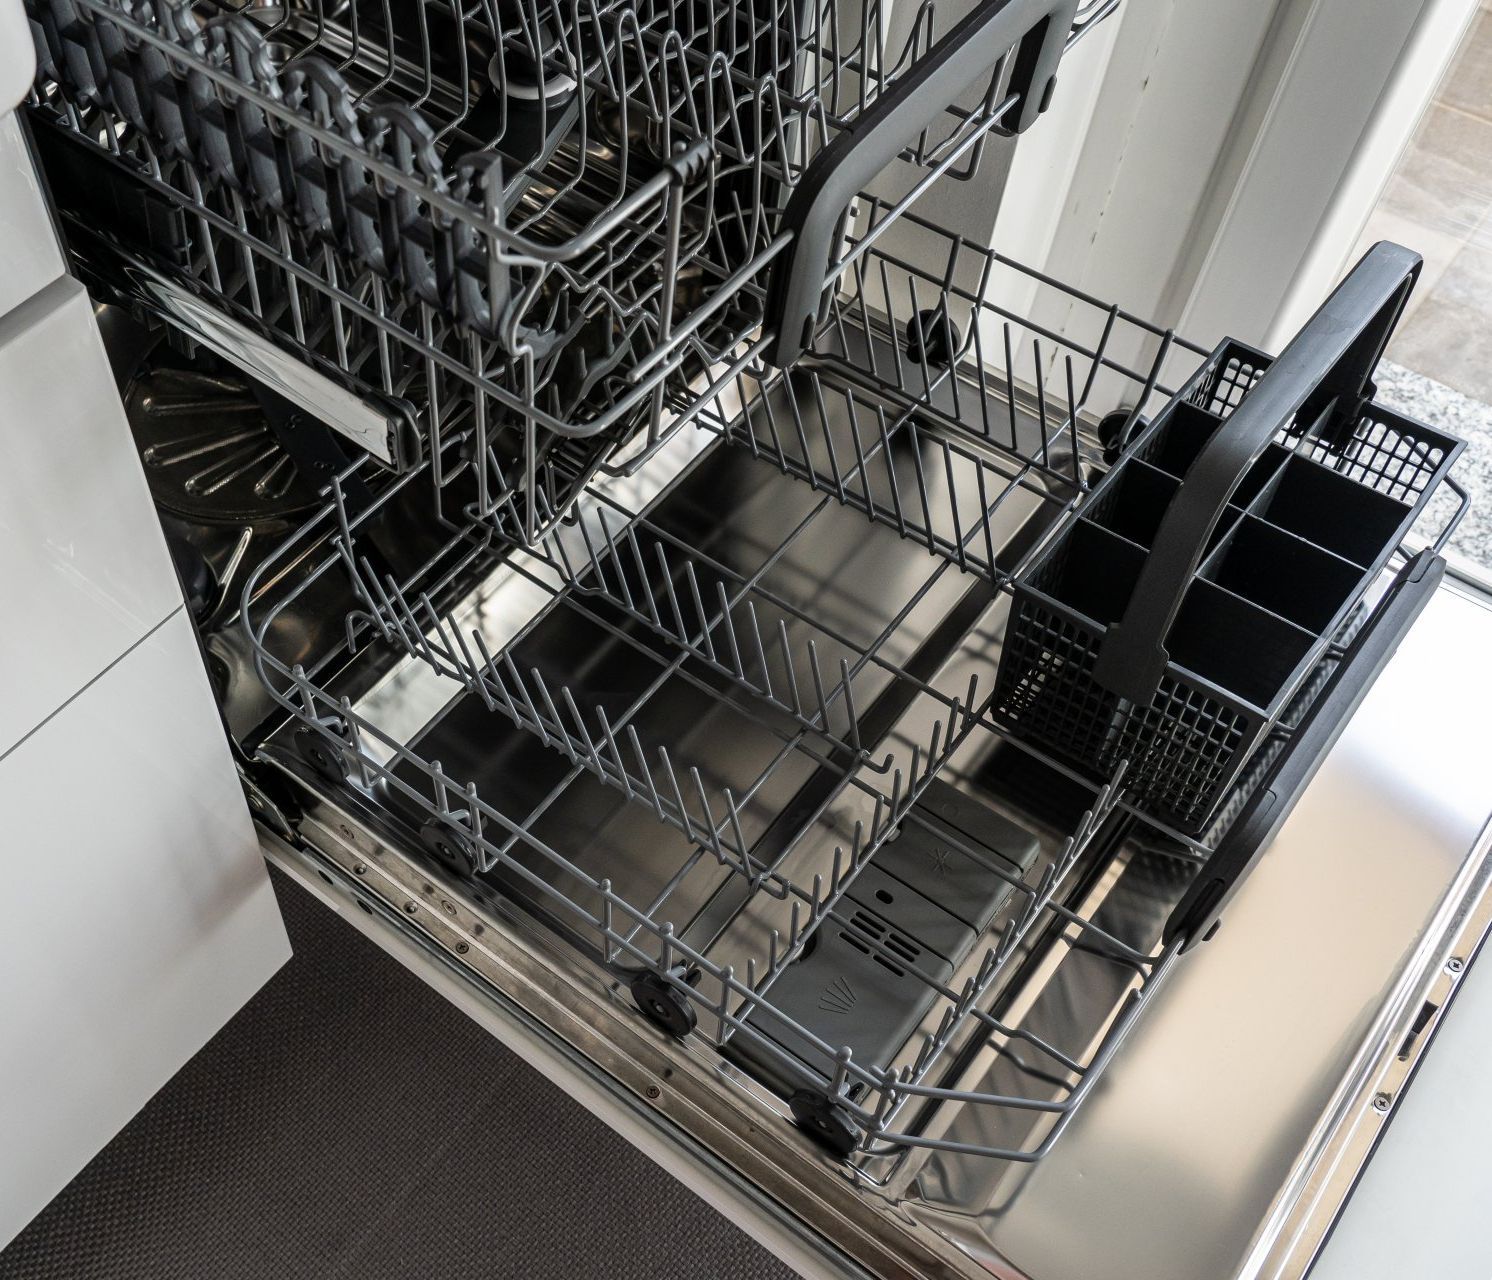 An open dishwasher with clean and empty racks, ready to be filled with dishes.